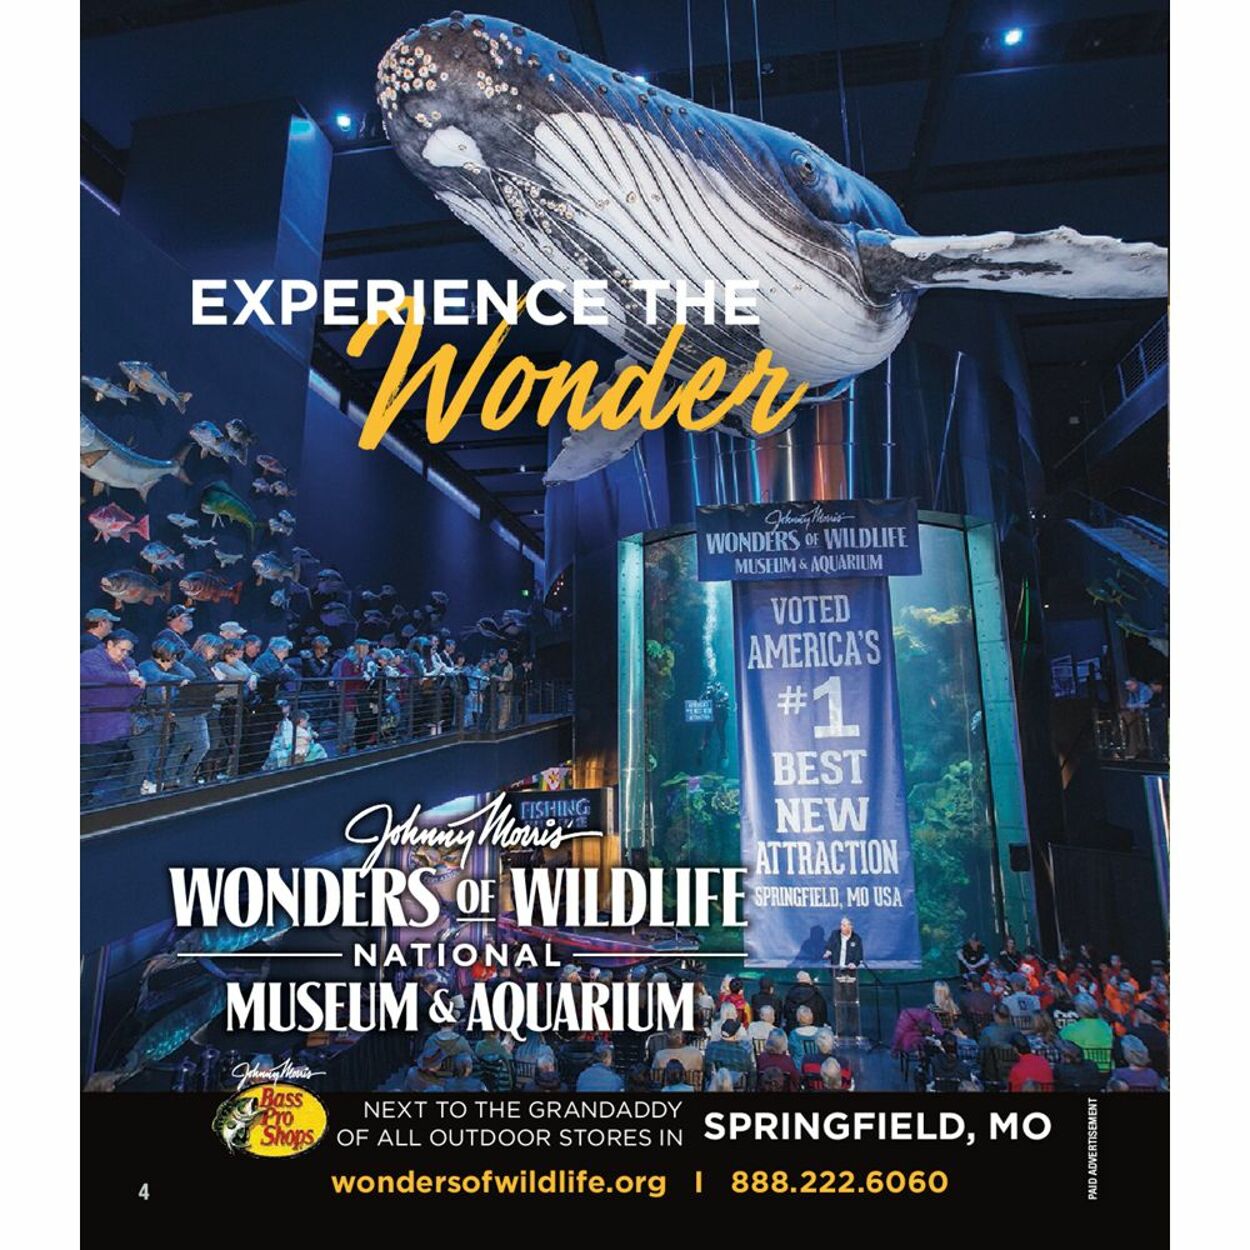 Weekly ad Bass Pro 04/01/2022 - 12/31/2022